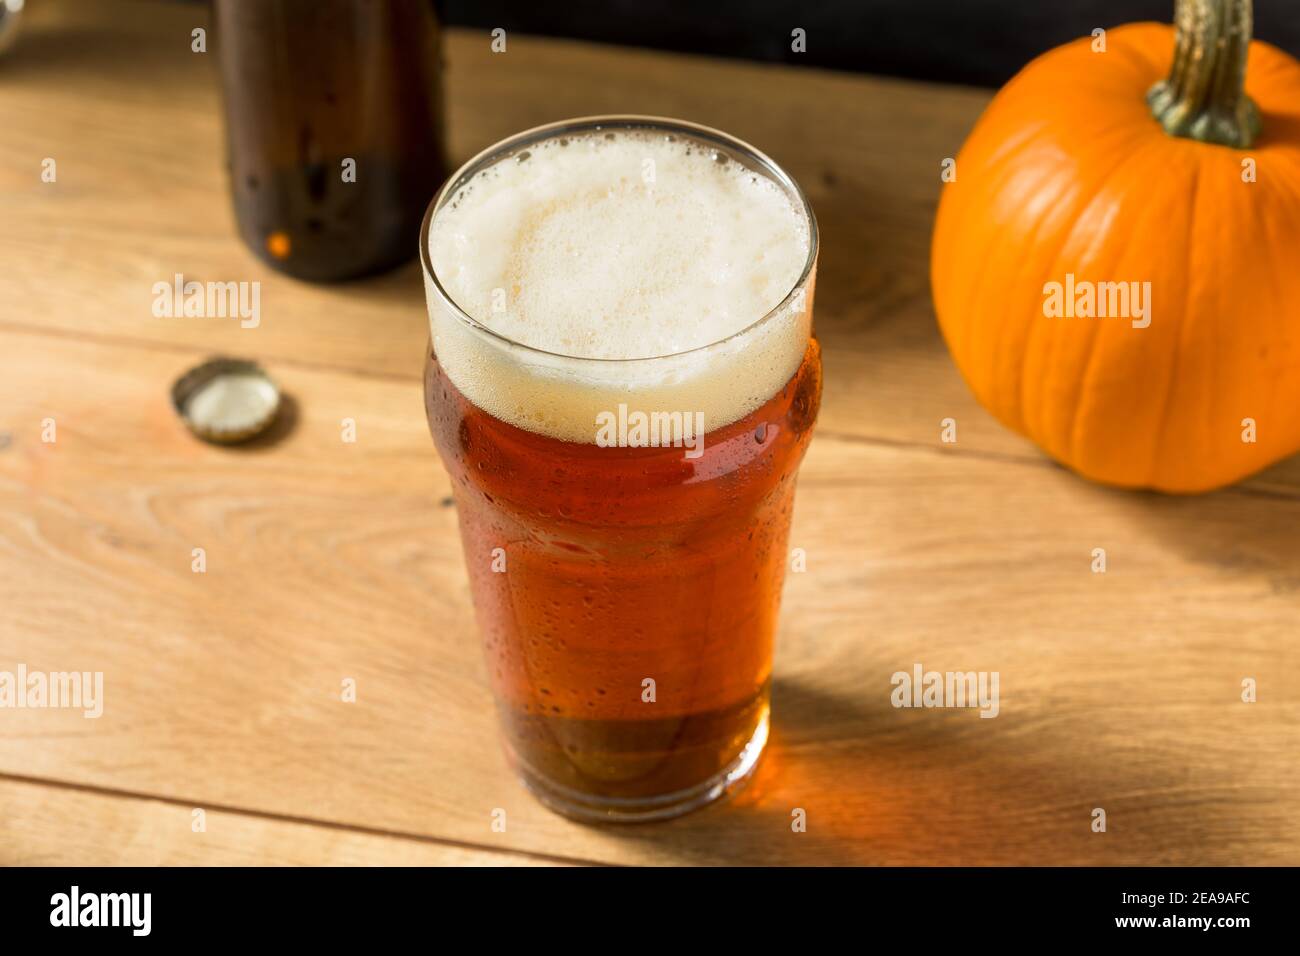 Cold Refreshing Pumpkin Ale Beer in a Pint Glass Stock Photo